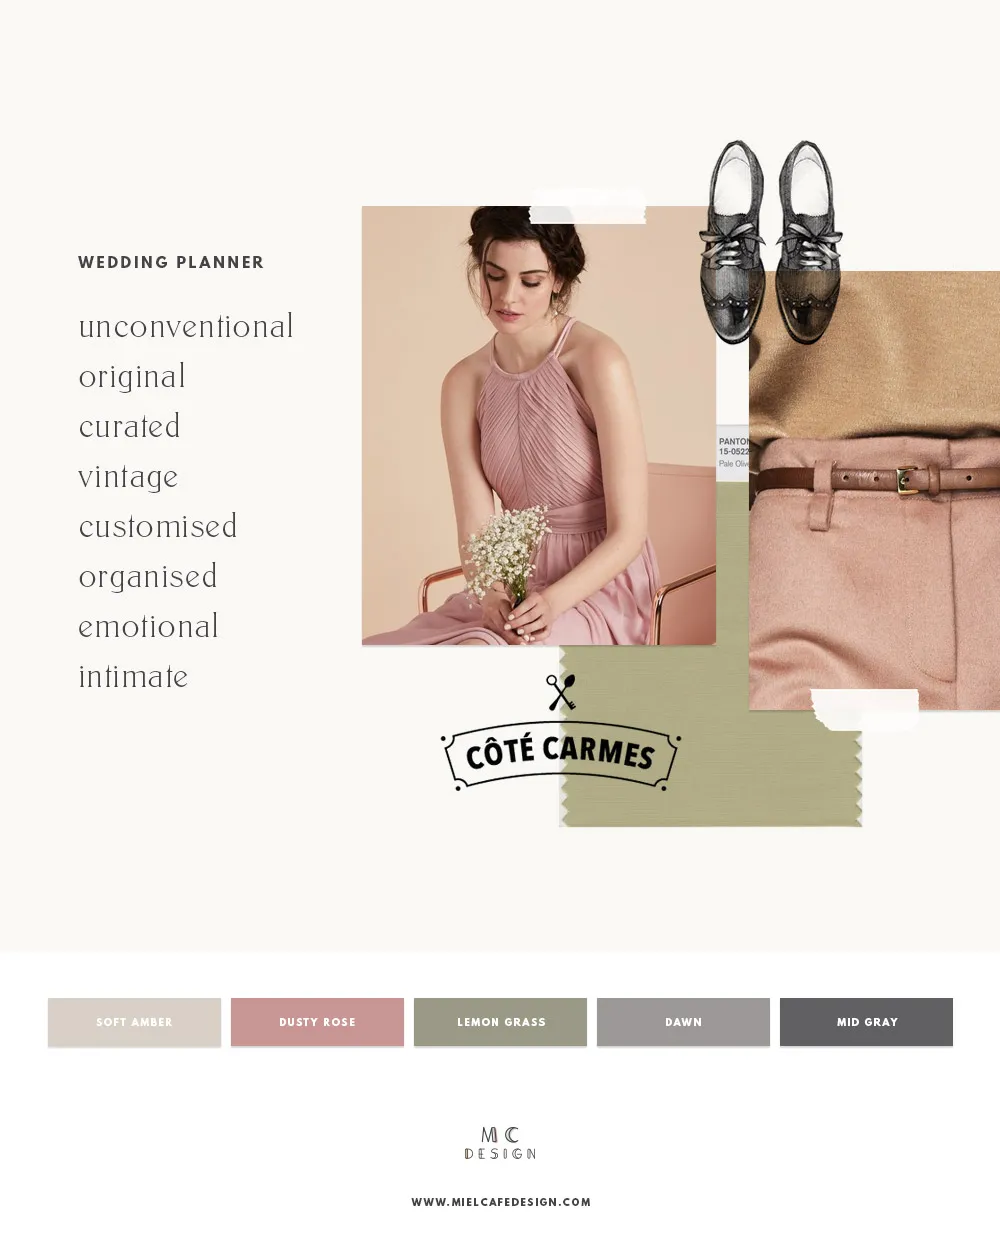 How to create your wedding planner brand - Visualise: romantic, luxury, dreamy, pastel, floral wedding planner mood board and color palette